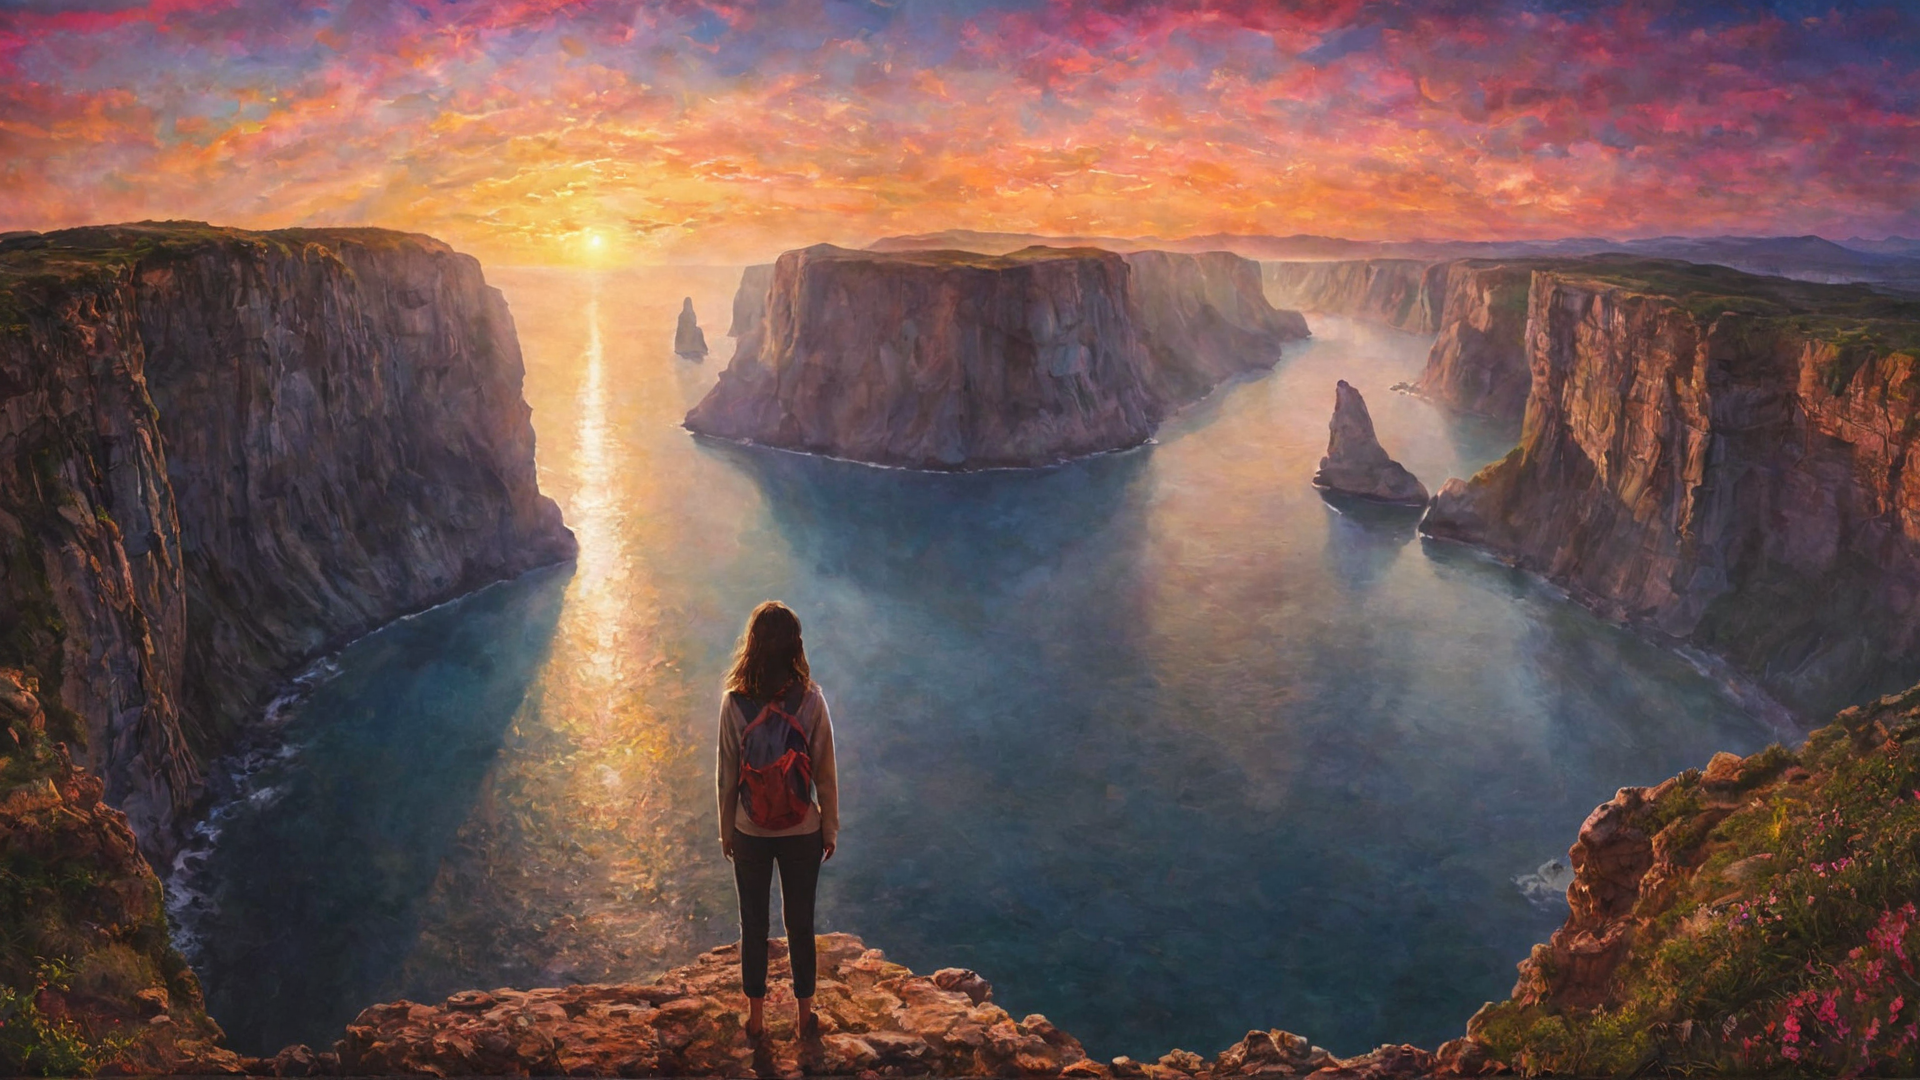 A figure stands confidently at a cliff's edge, ready to explore the vast, colorful landscape of their inner self under a dawn sky, symbolizing the journey to uncover the real essence beyond societal norms.